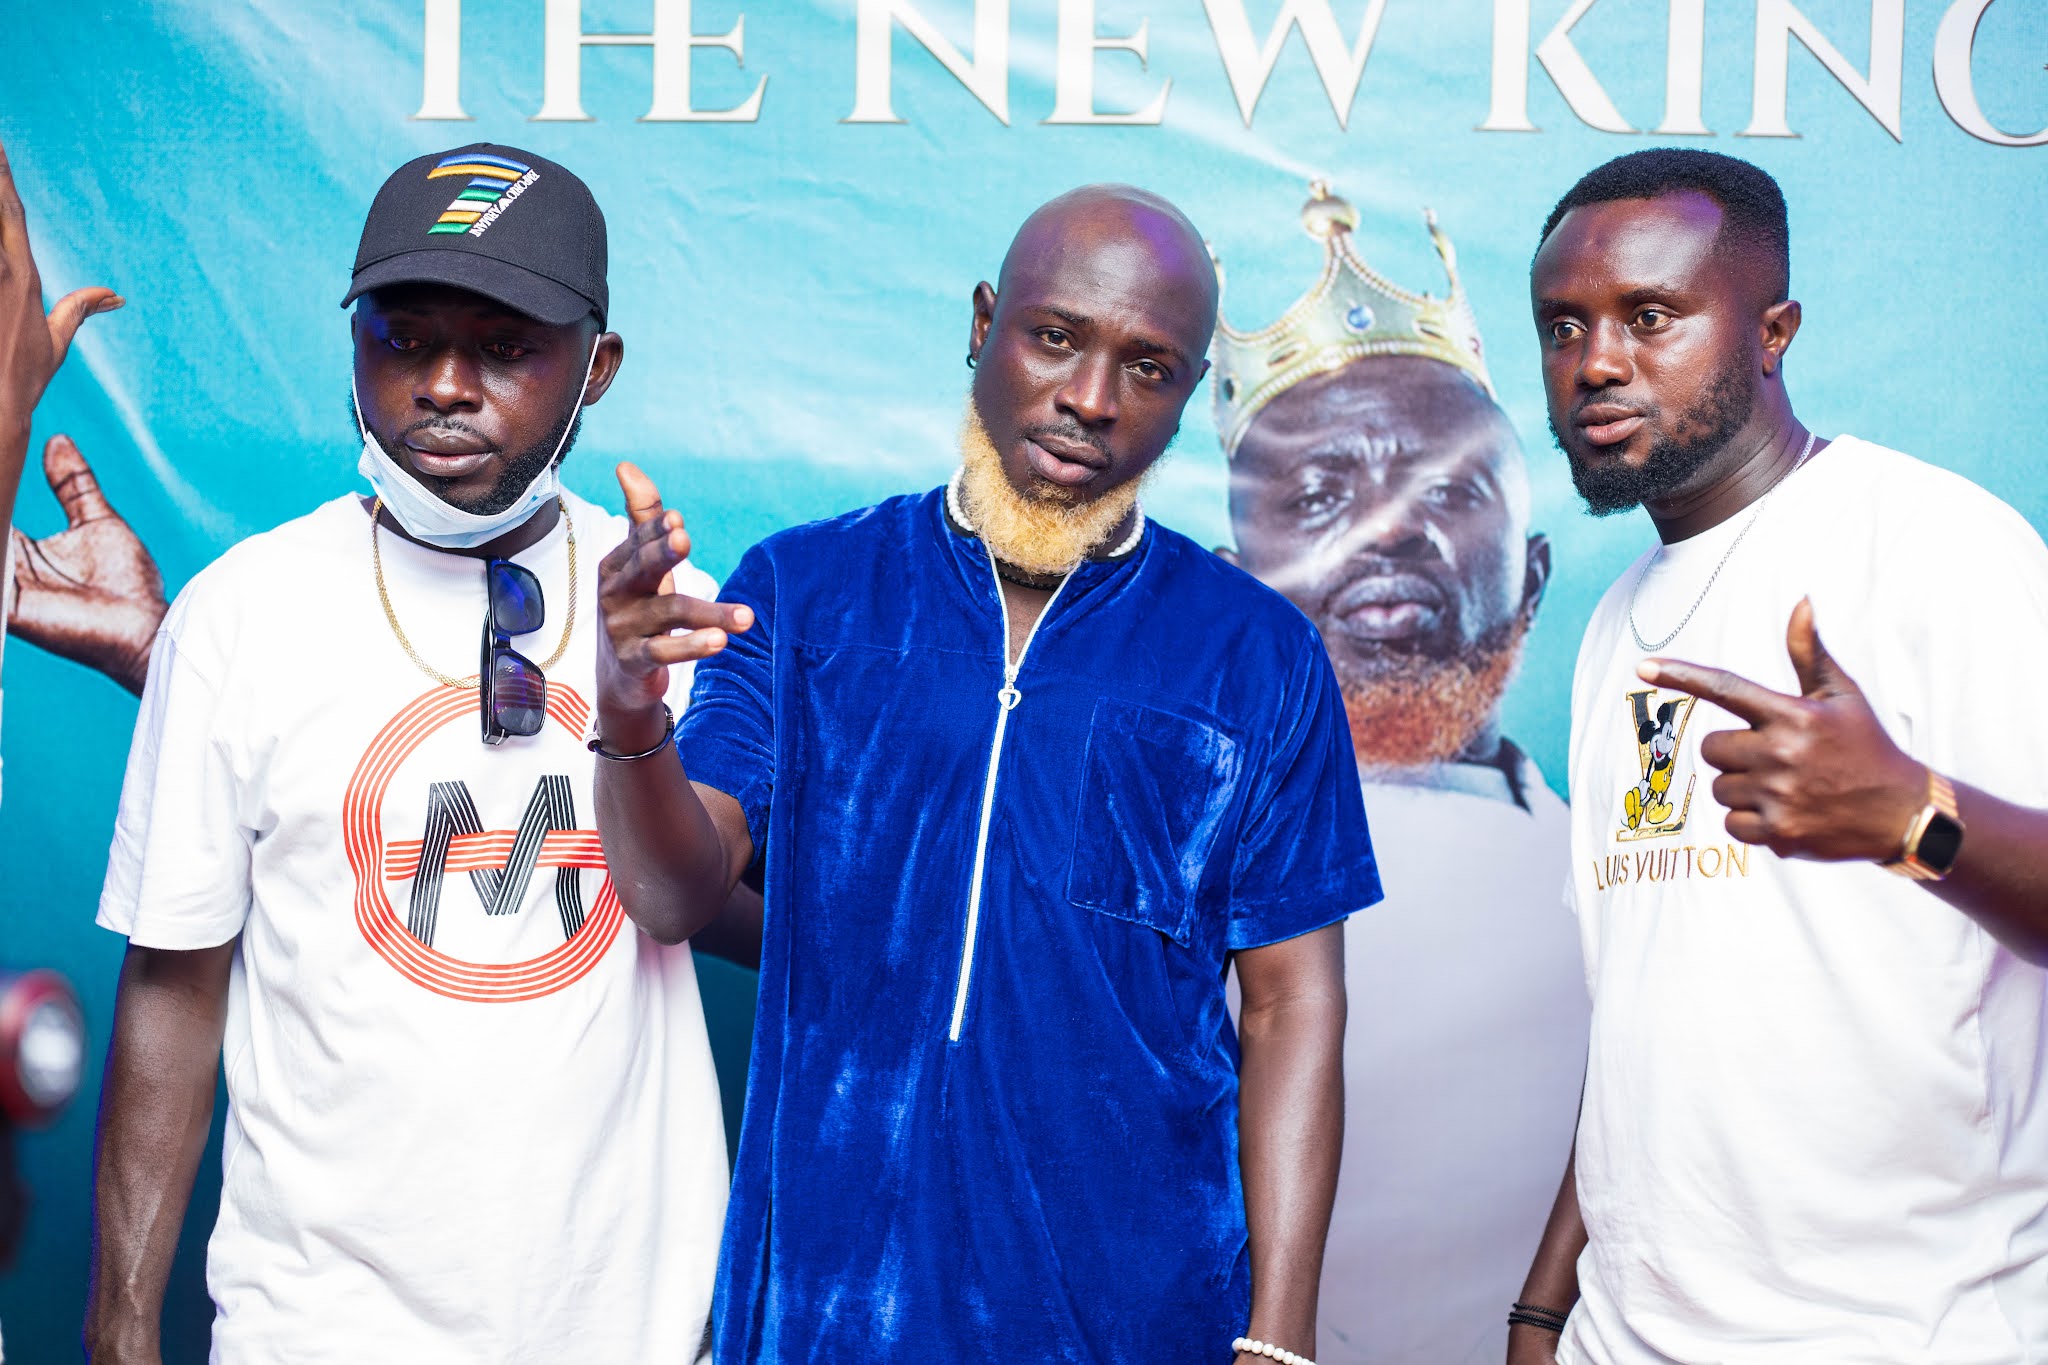 Photos: Kwame Yogot holds listening session for his ‘New King’ EP